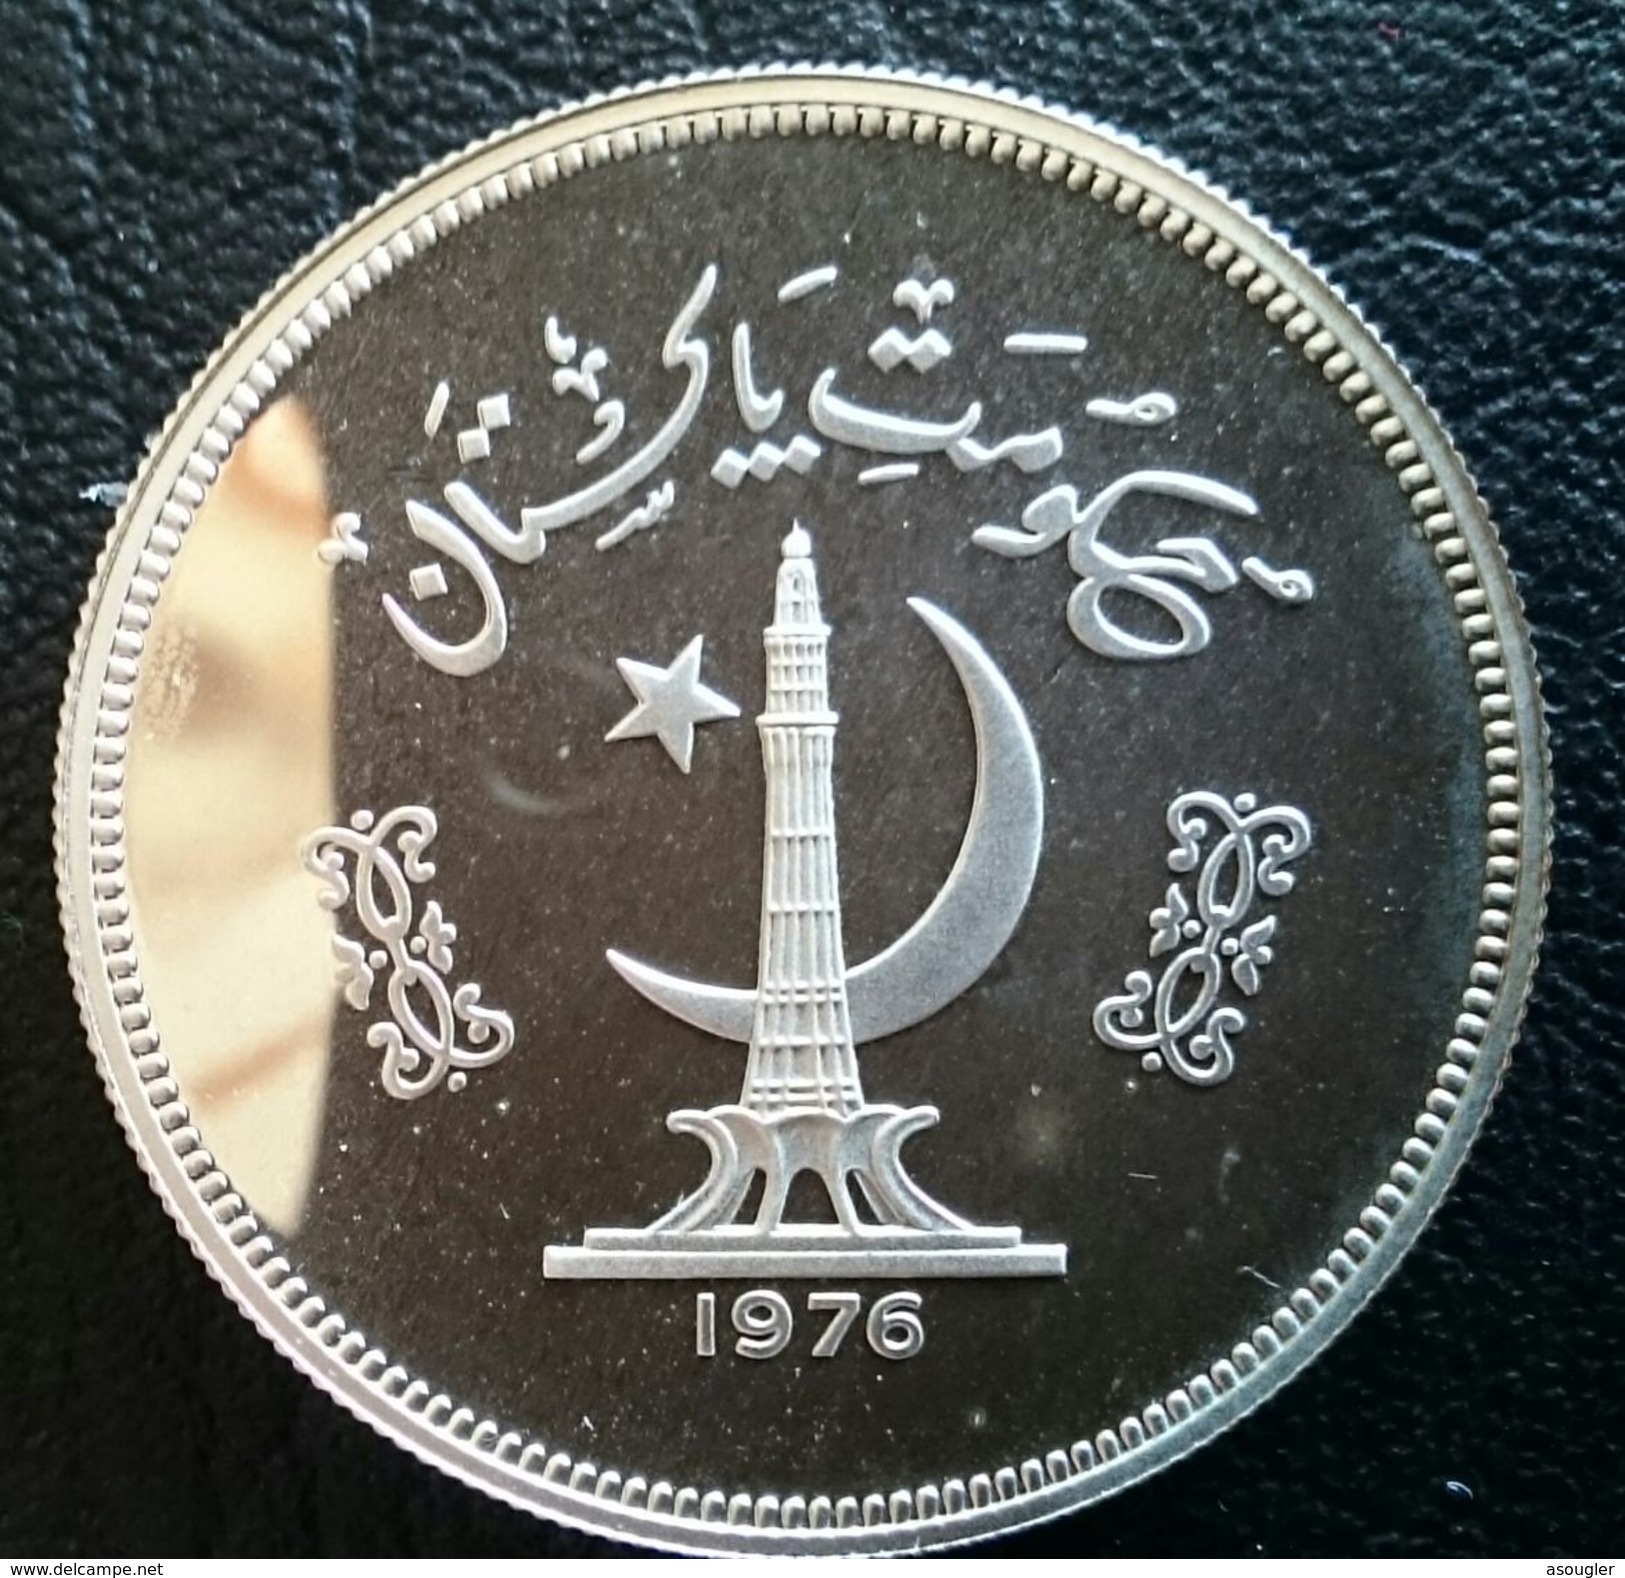 PAKISTAN 100 RUPEES 1976 SILVER PROOF "Conservation" Free Shipping Via Registered - Pakistan